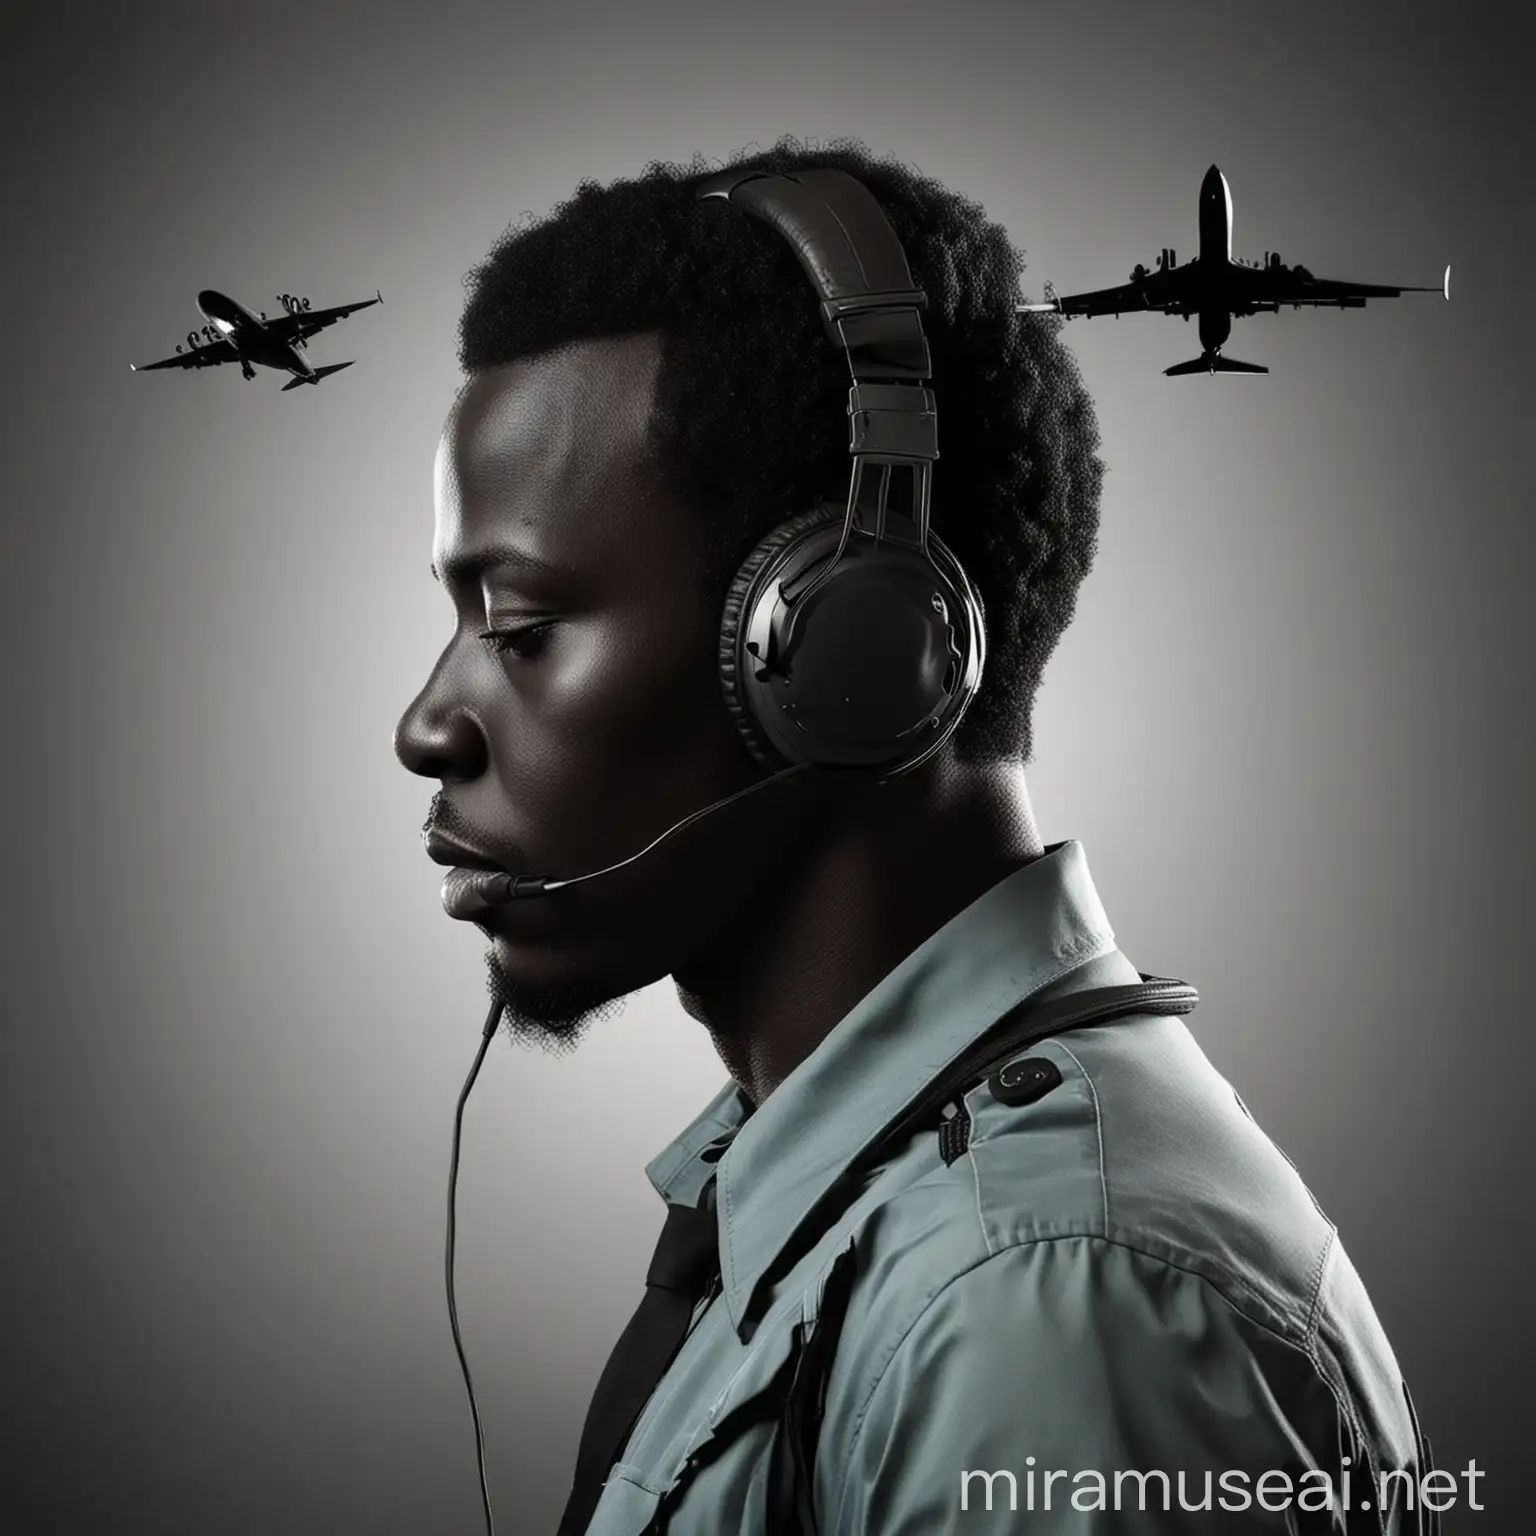 African Black Silhouette with Air Traffic Controller Headphones